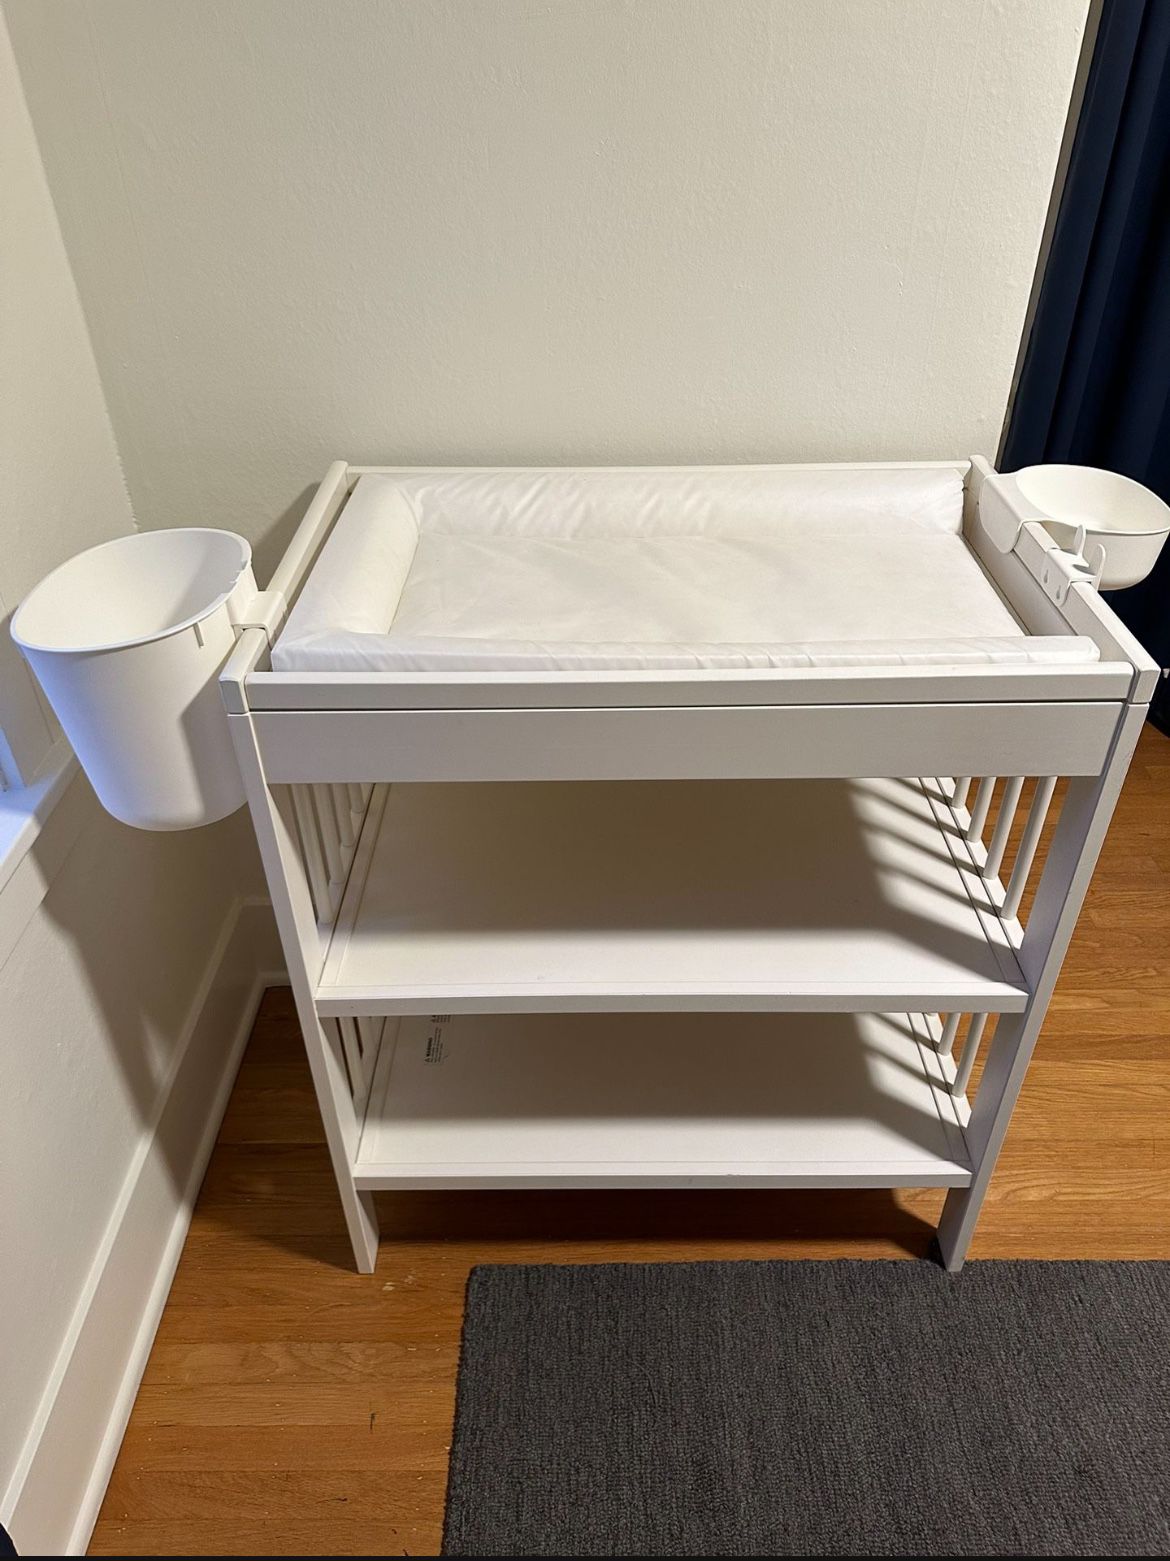 Ikea changing table 